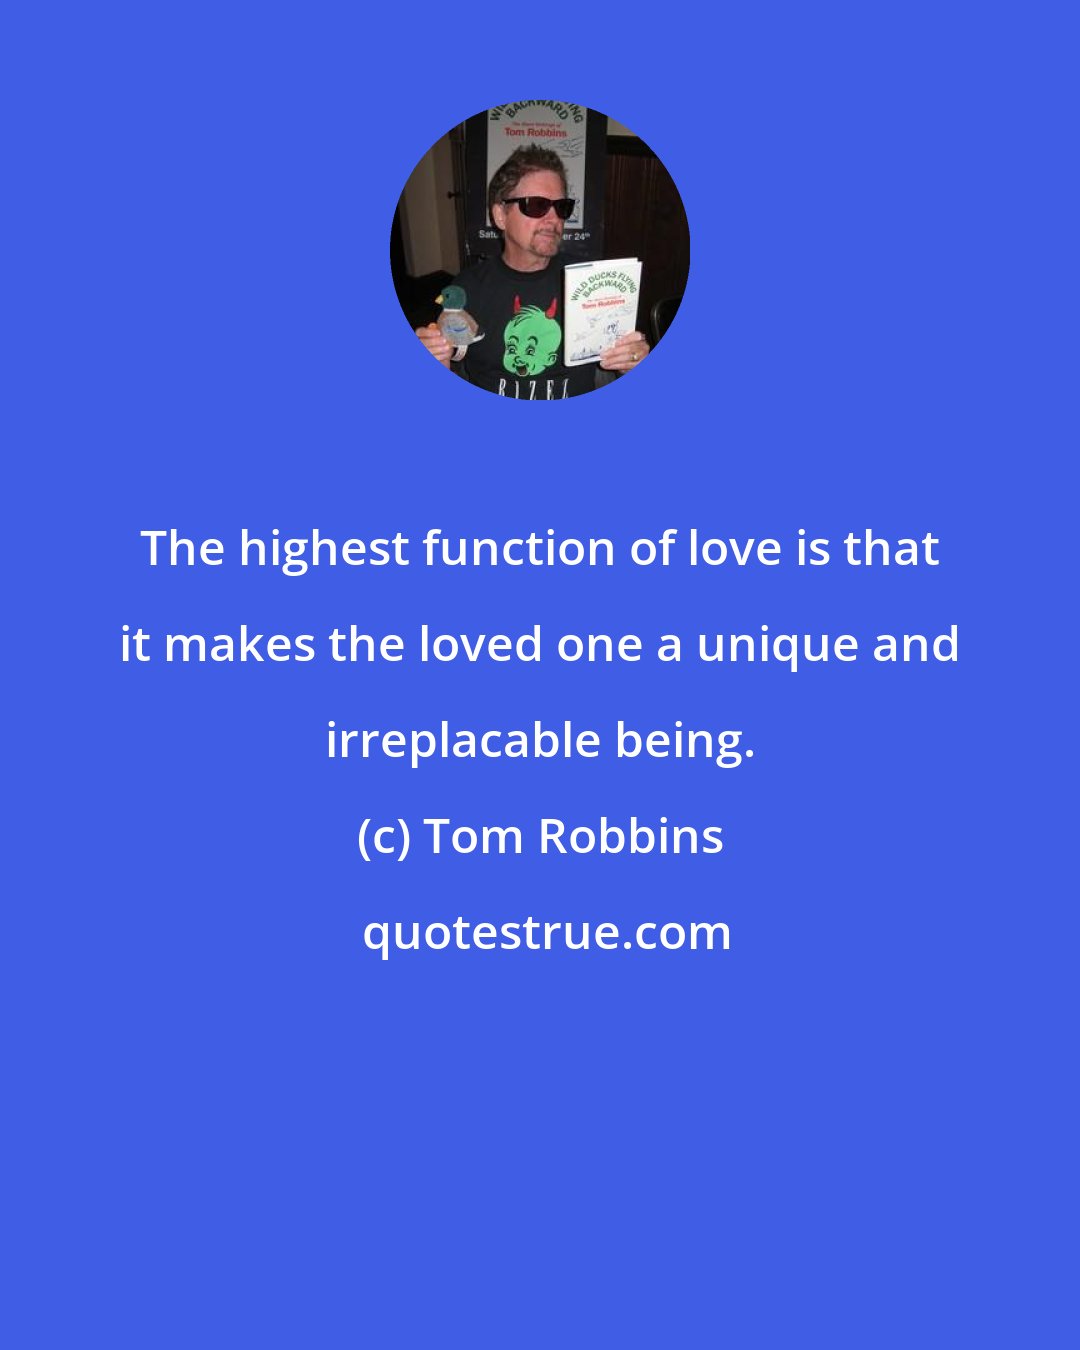 Tom Robbins: The highest function of love is that it makes the loved one a unique and irreplacable being.